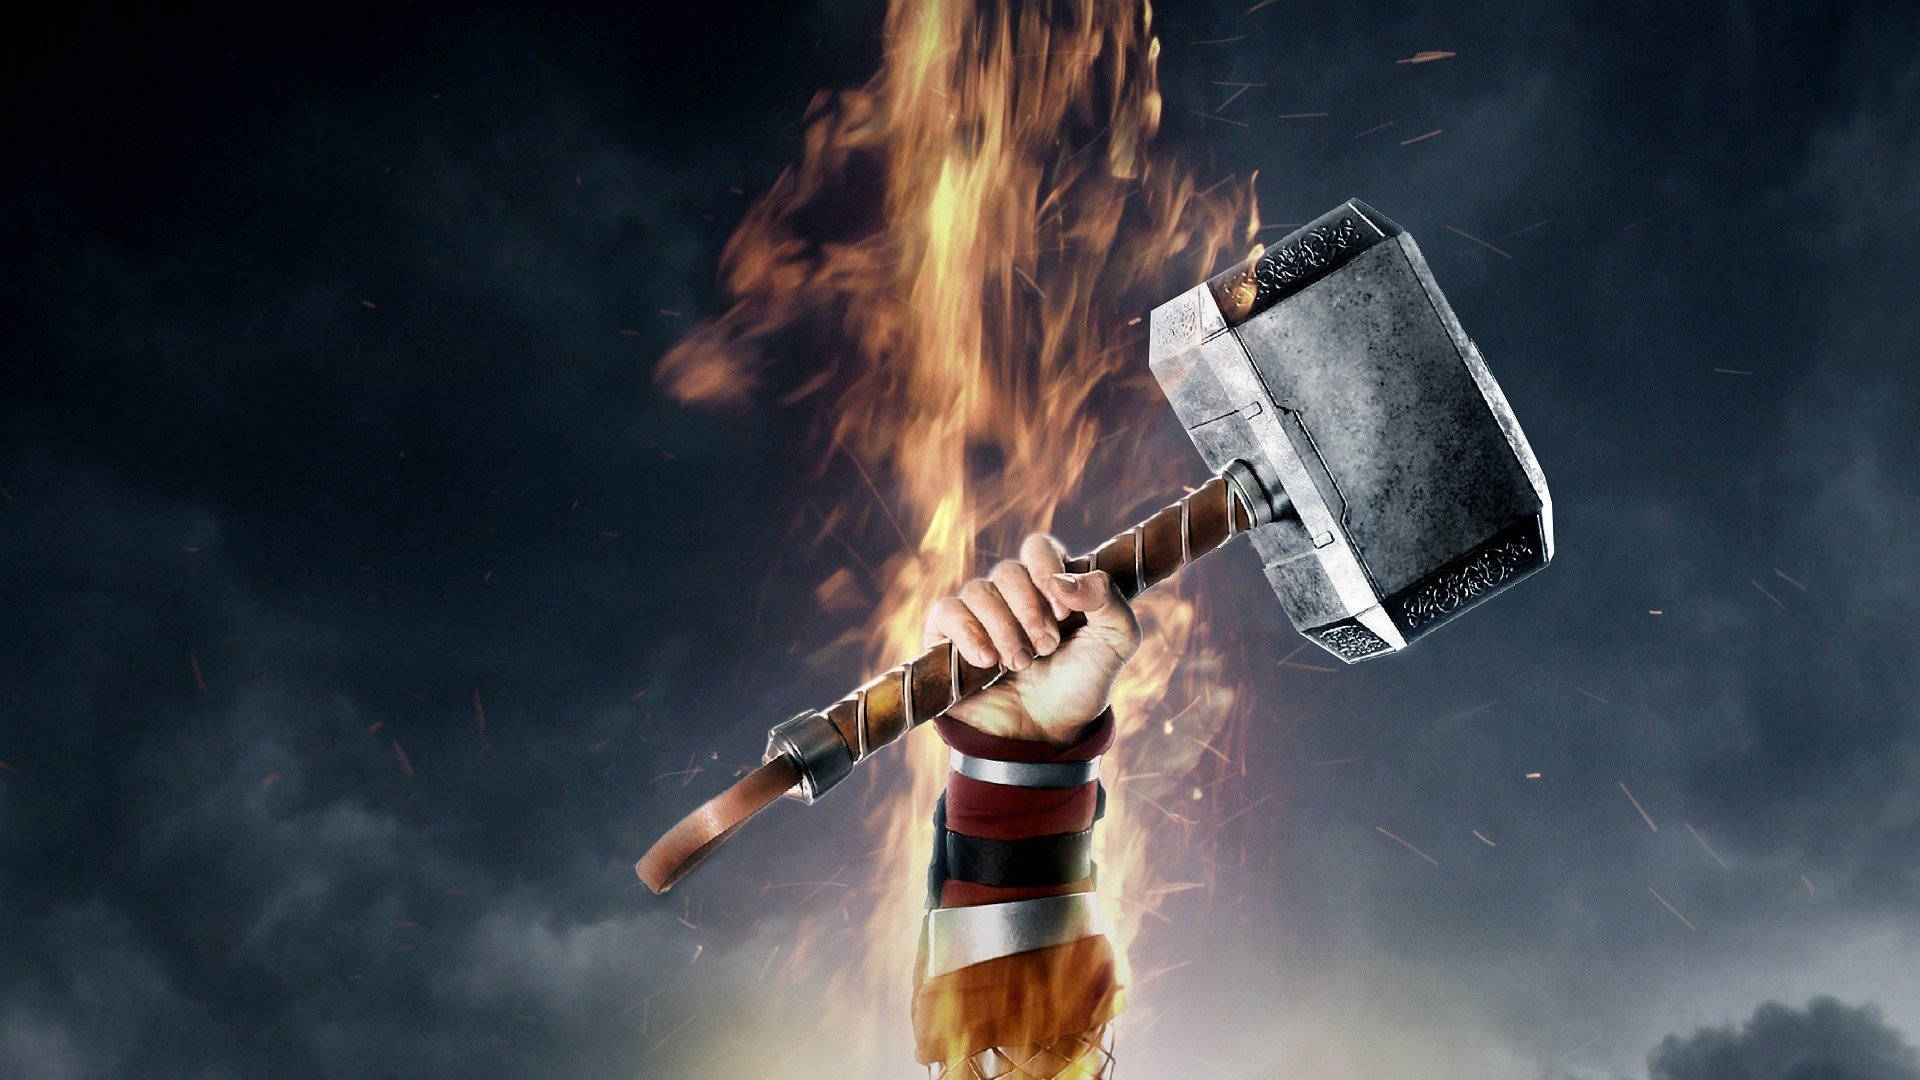 Thor Hammer Held By A Flaming Hand Wallpaper